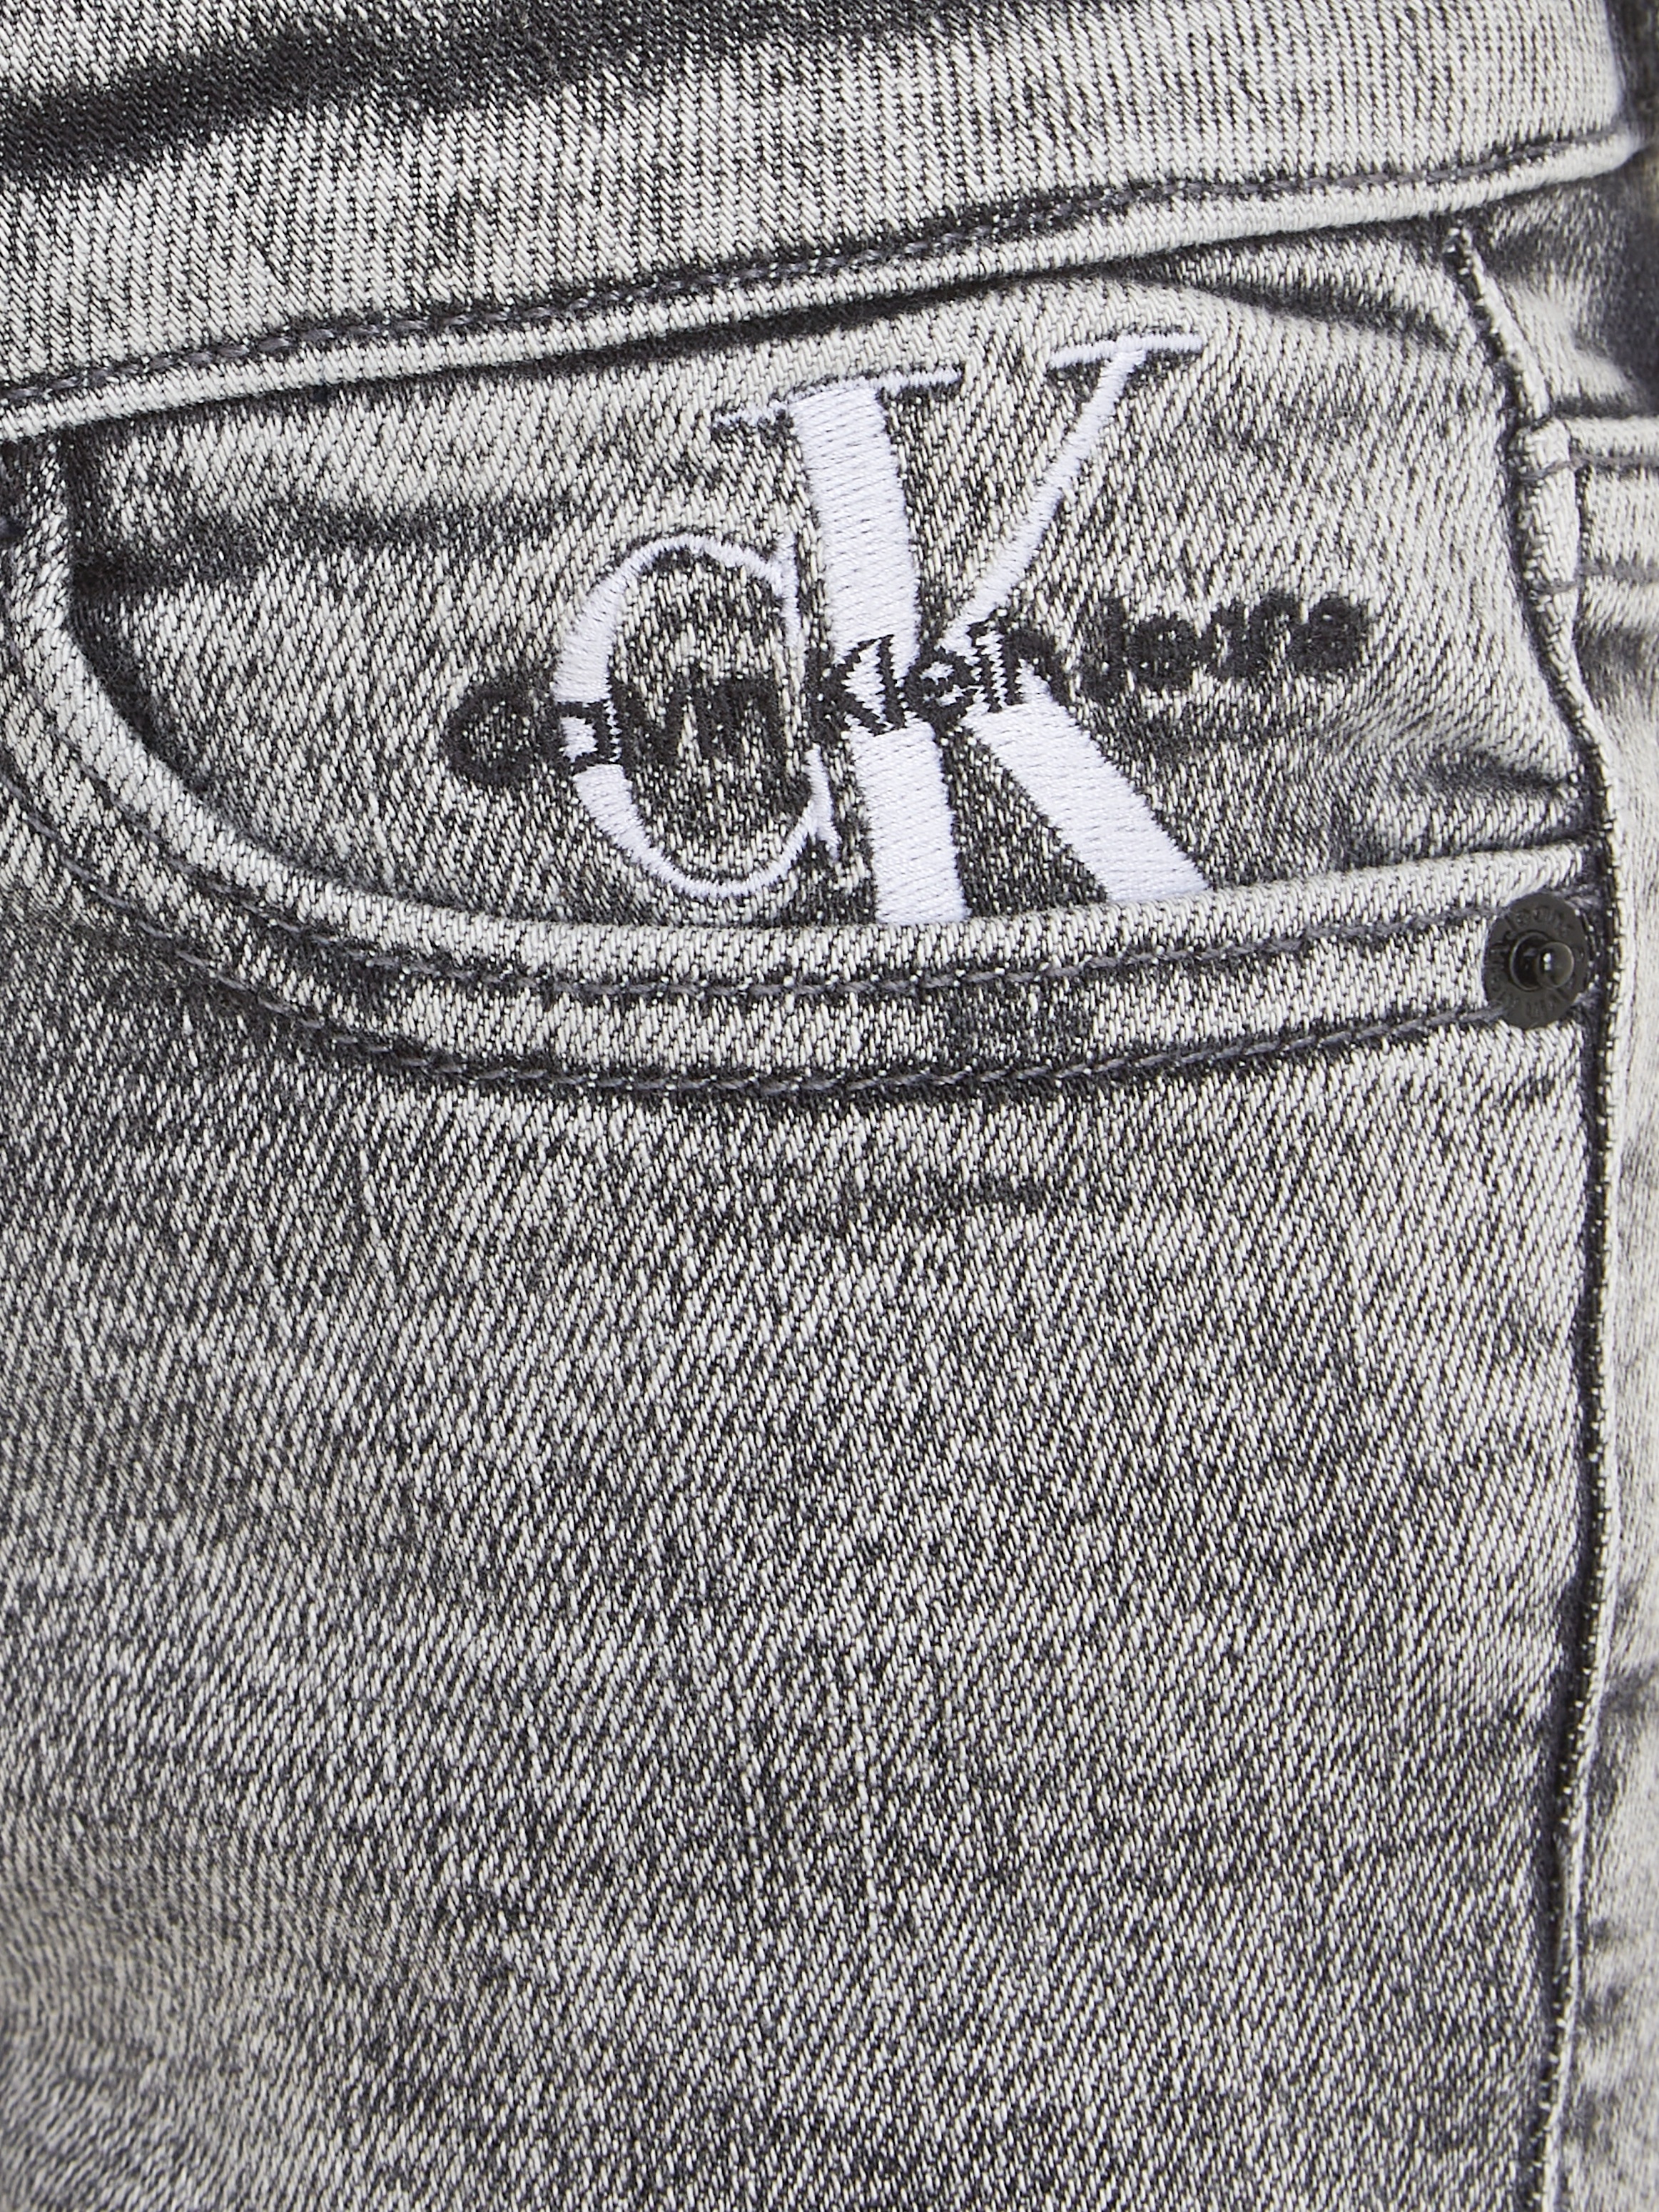 bei Klein WASHED »SKINNY ♕ Jeans GREY« Stretch-Jeans MR Calvin